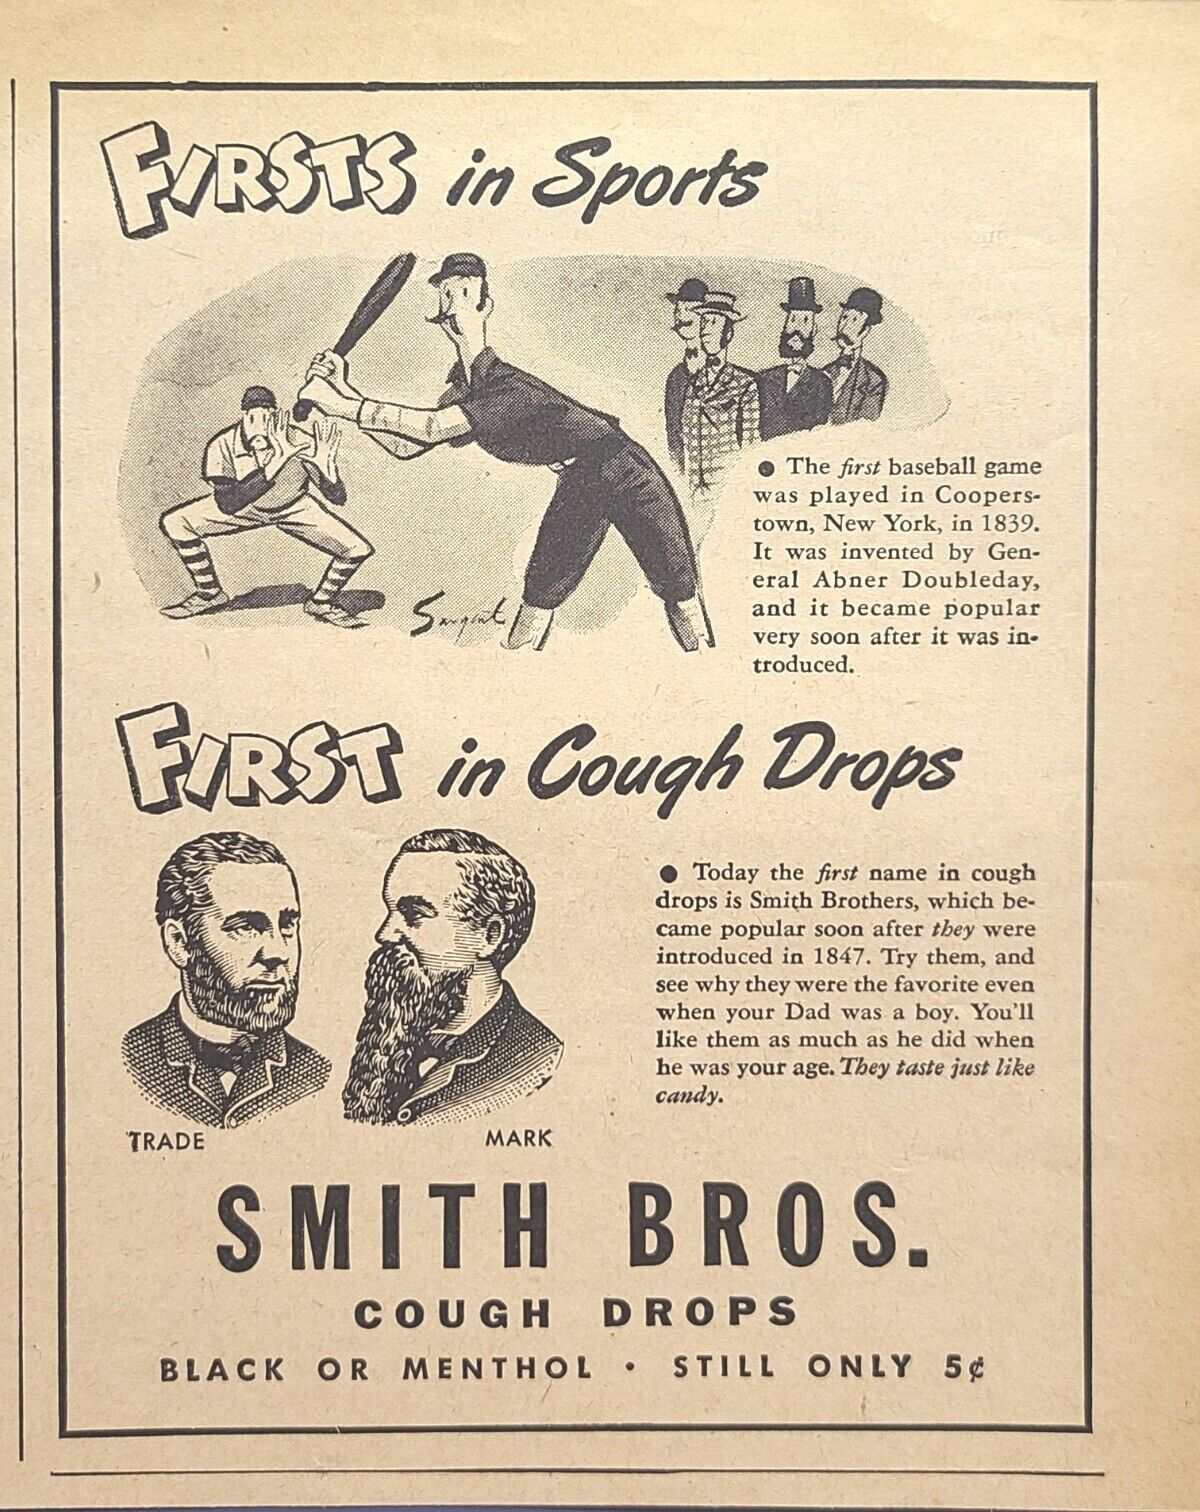 Smith Bros Cough Drops Baseball Doubleday Cooperstown Vintage Print Ad 1945